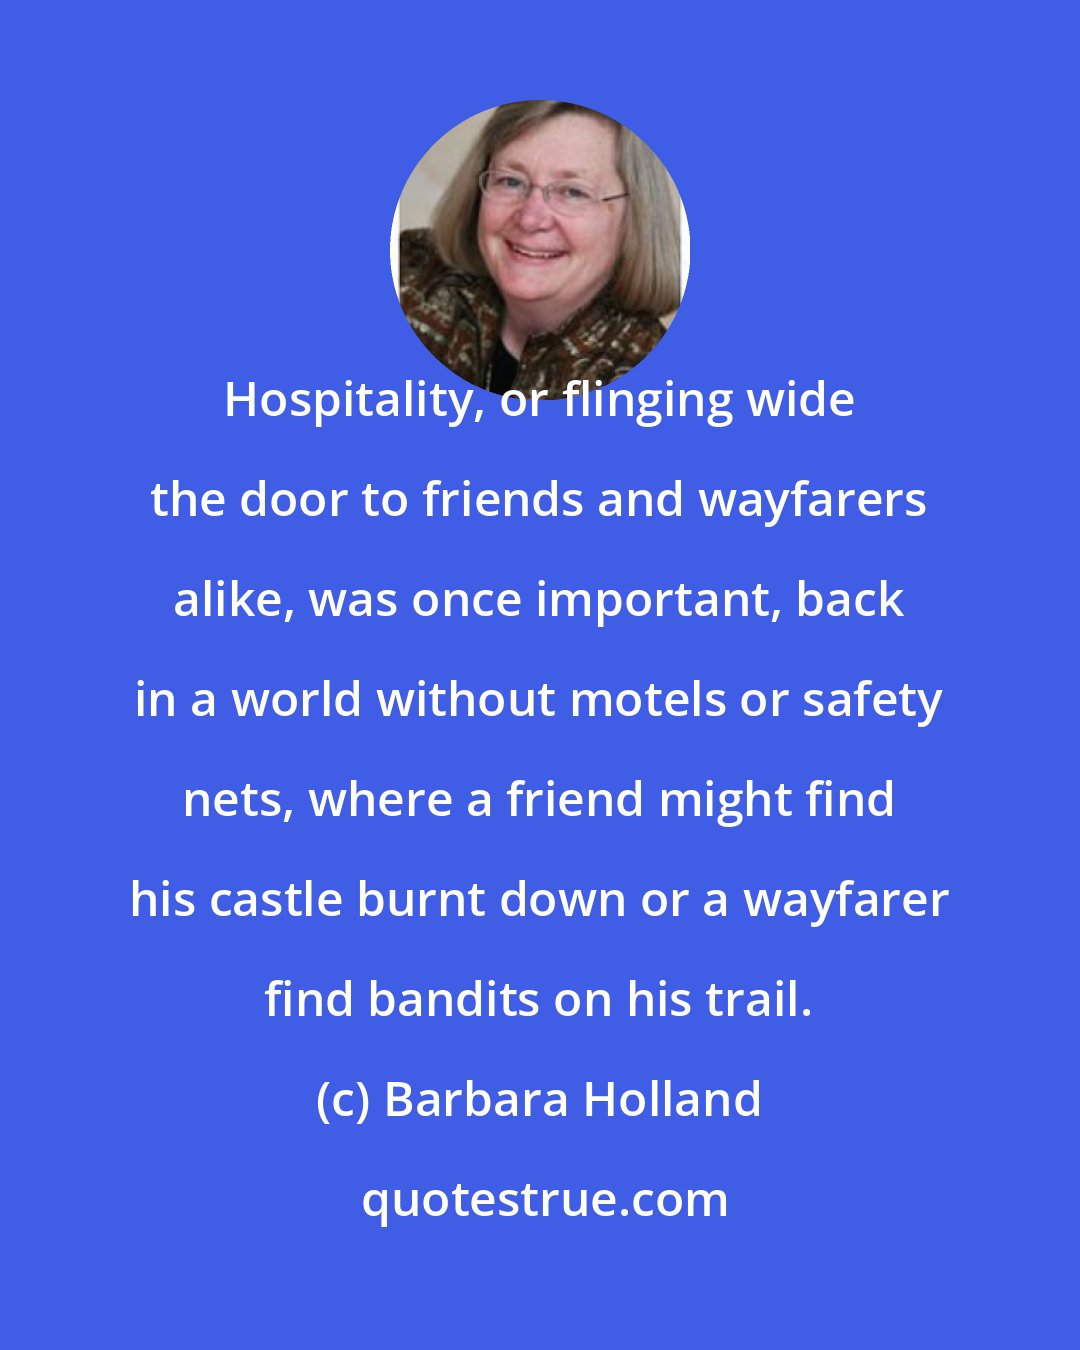 Barbara Holland: Hospitality, or flinging wide the door to friends and wayfarers alike, was once important, back in a world without motels or safety nets, where a friend might find his castle burnt down or a wayfarer find bandits on his trail.